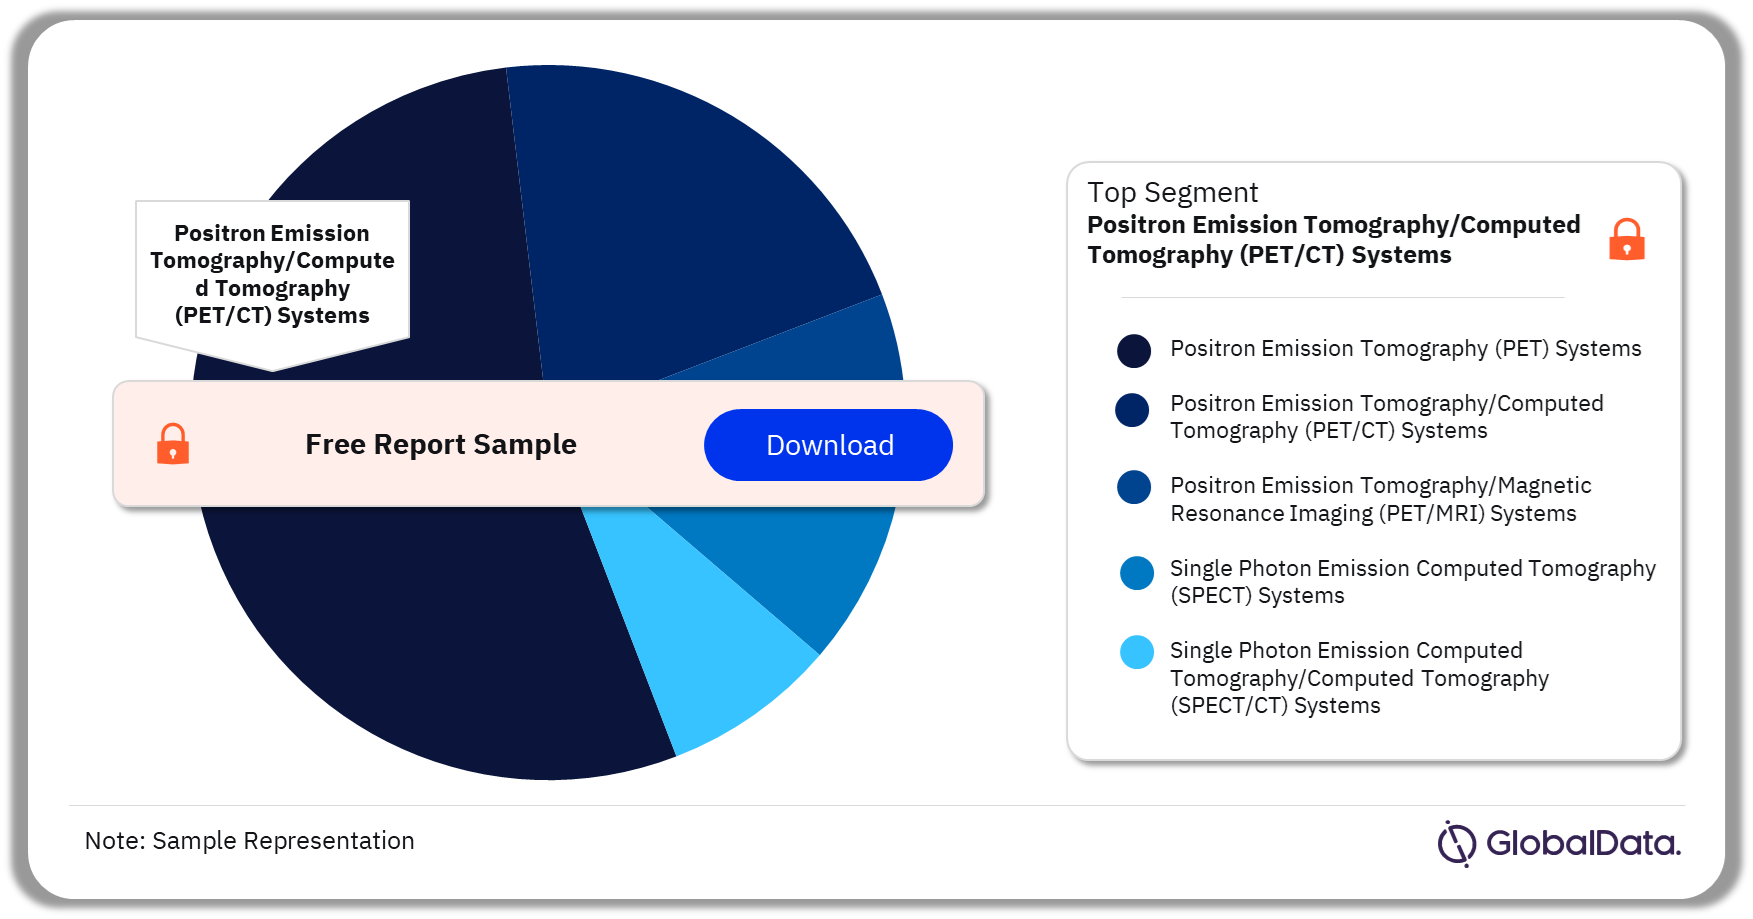 Nuclear Imaging Equipment Market Analysis by Segments, 2023 (%)